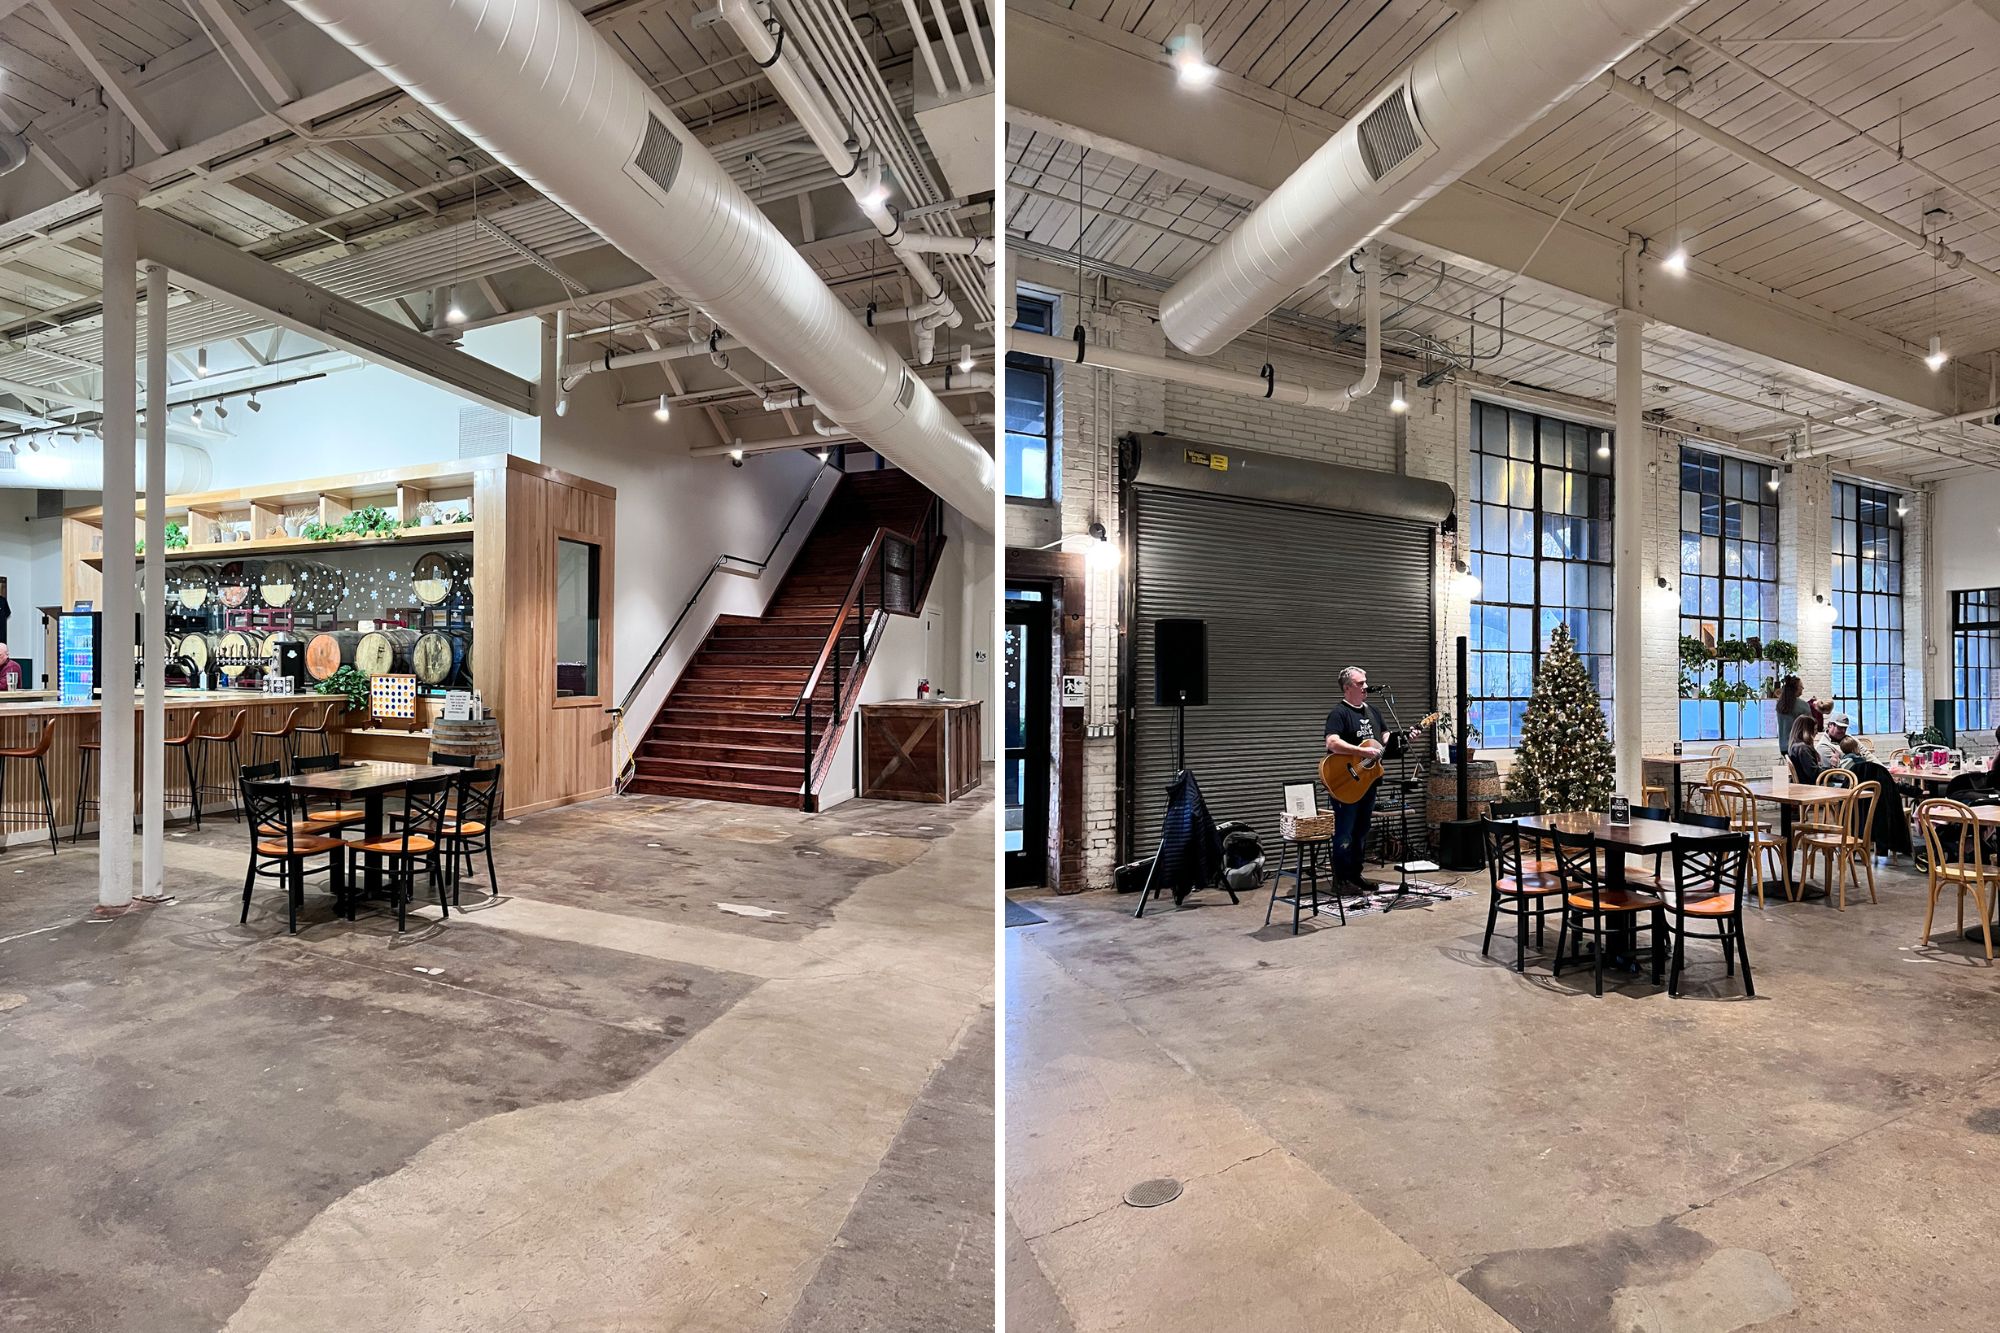 Interior of High Branch Brewing, with a live musician playing guitar